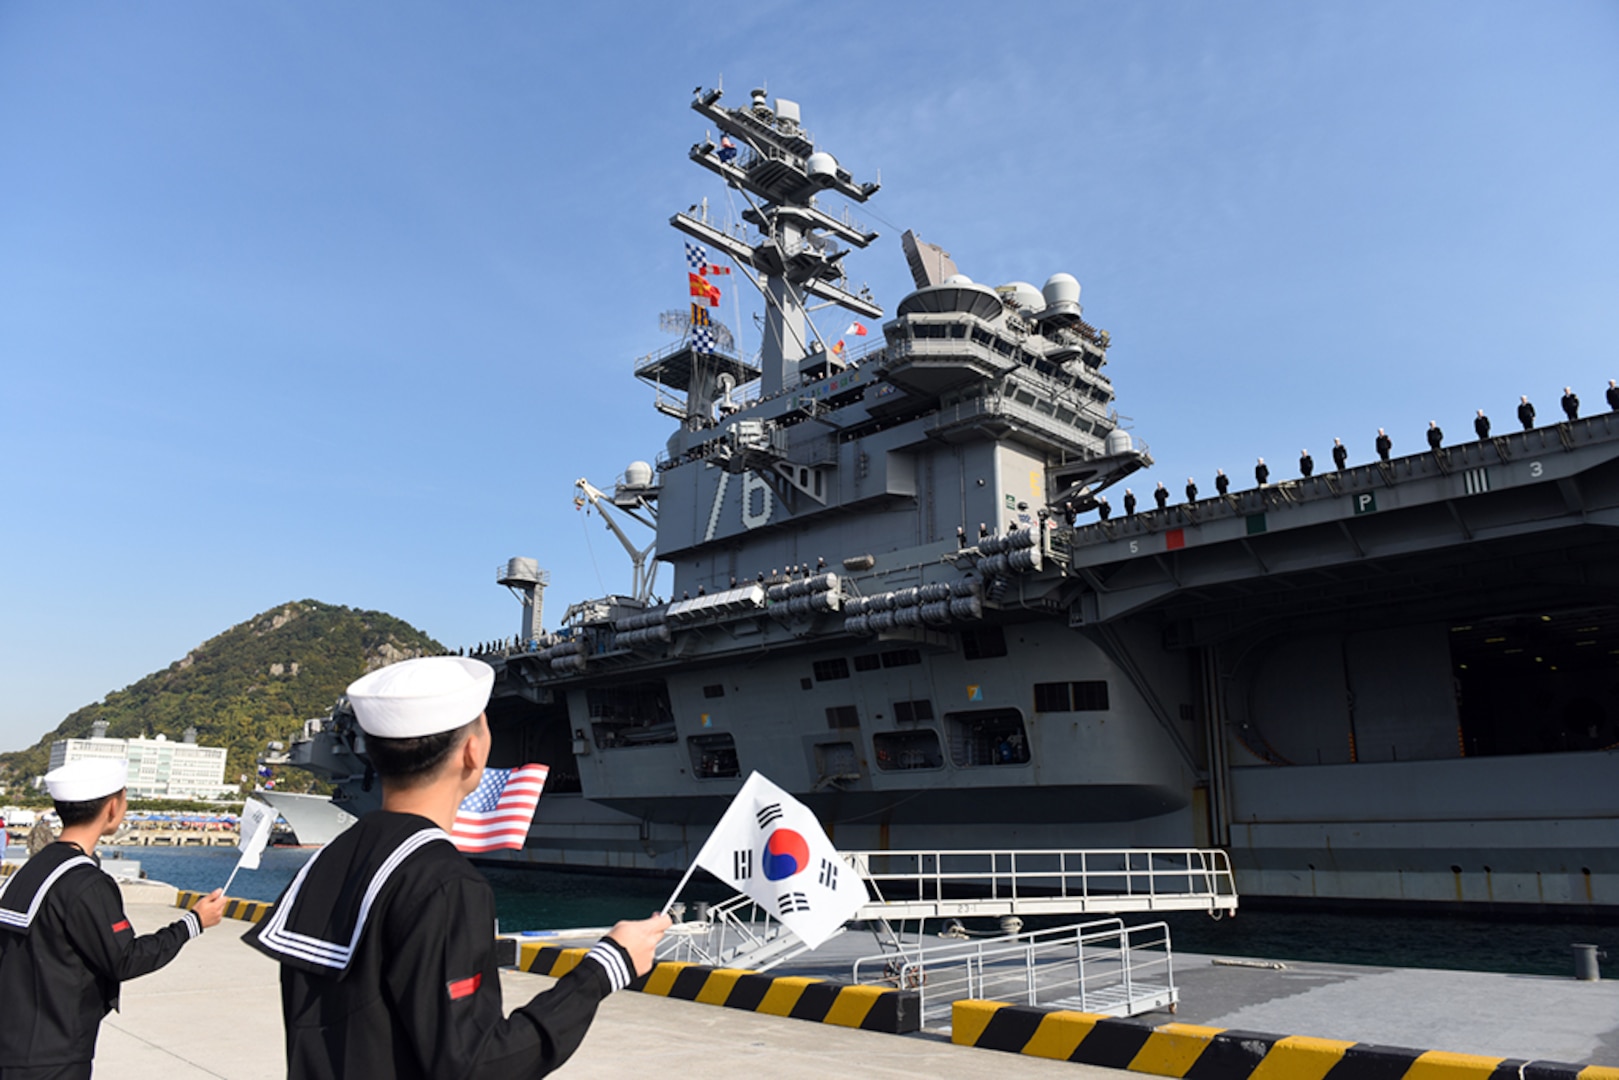 BUSAN, Republic of Korea, (October 30, 2015) Sailors assigned to the Nimitz class aircraft carrier USS Ronald Reagan (CVN 76), receive a welcome from Republic of Korea (ROK) sailors as it pulls into Busan. Reagan is the Navy's only forward deployed aircraft carrier and is conducting a scheduled port visit while participating in bilateral training with the ROK Navy to strengthen the U.S.-ROK alliance and improve regional stability. Ronald Reagan and its embarked air wing, Carrier Air Wing (CVW) 5, provide a combat ready force that protects and defends the collective maritime interests of the U.S. and its allies and partners in the Indo-Asia-Pacific region. 